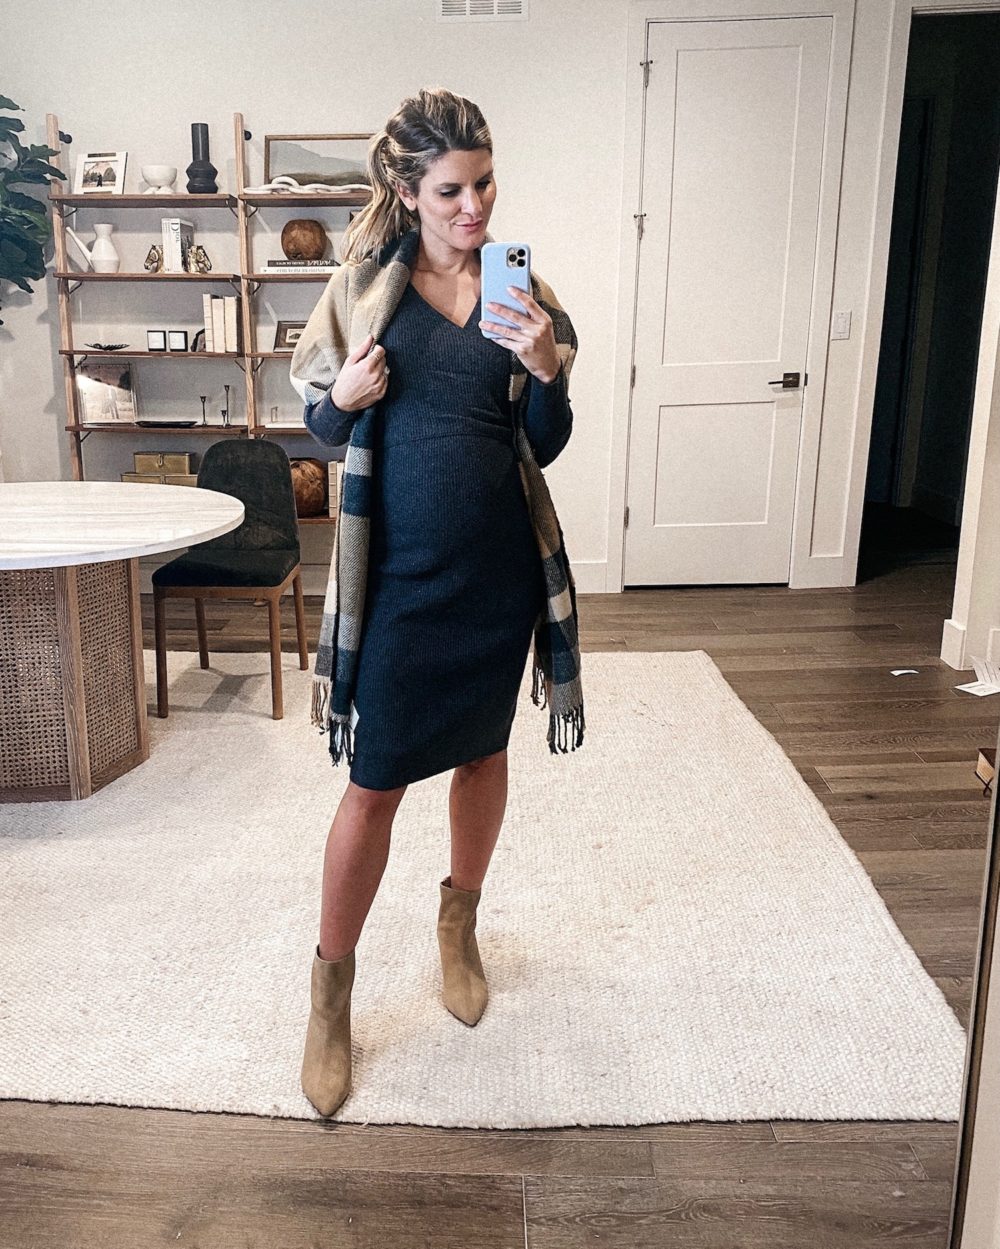 Brighton Butler wearing a grey sweater dress, check scarf and tan booties, pregnancy style